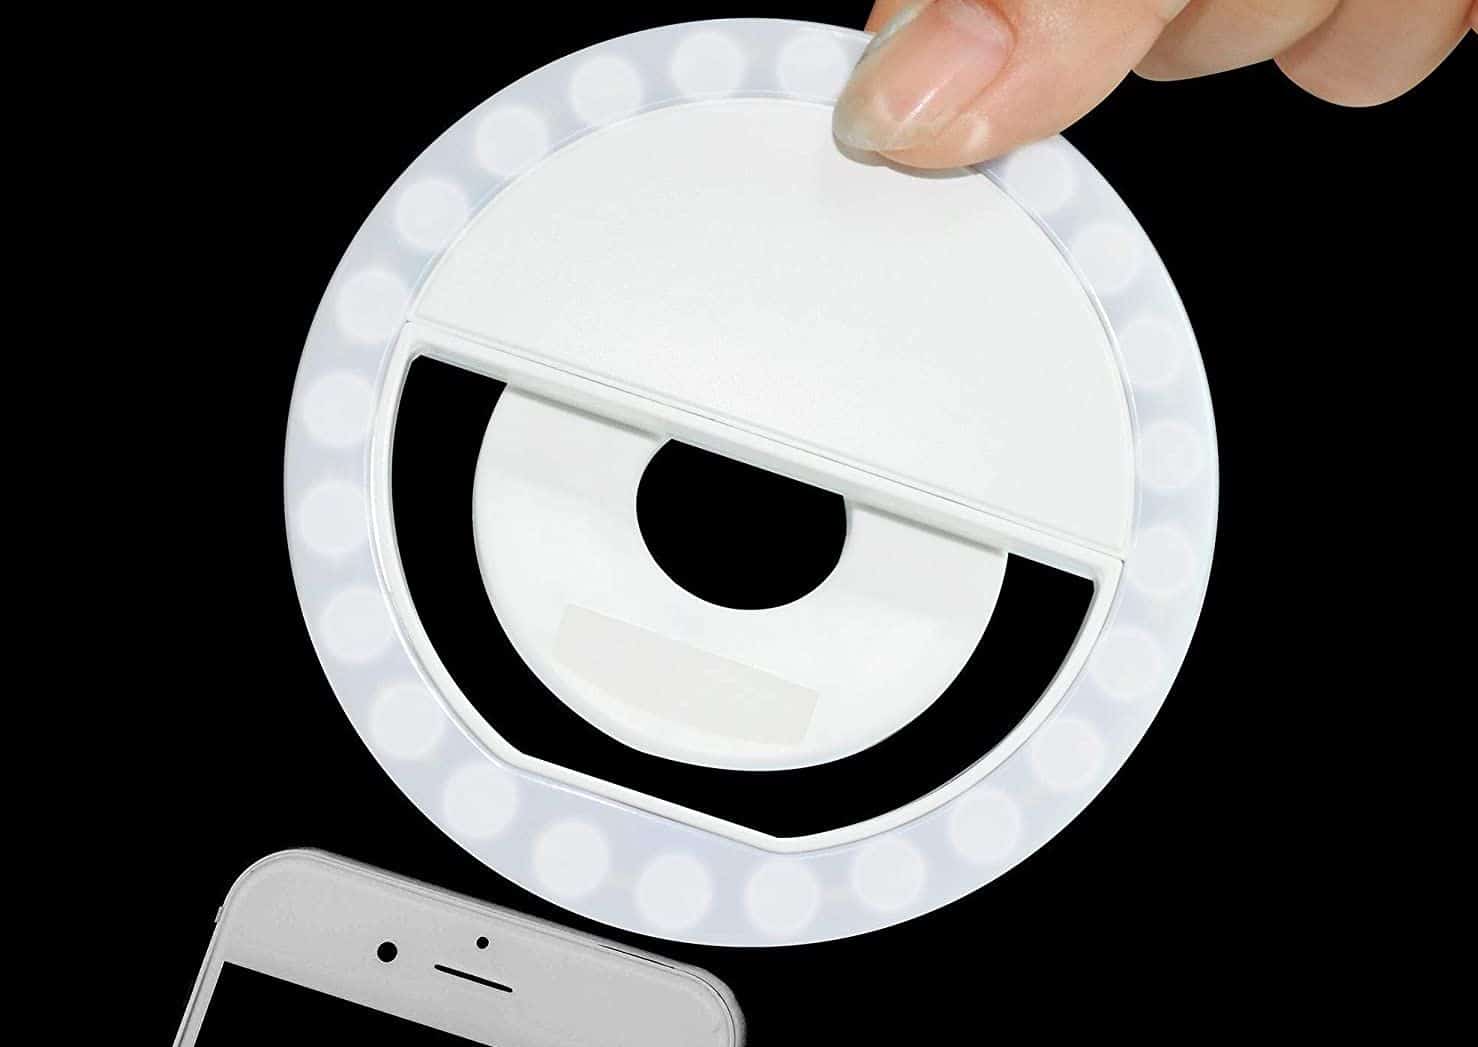 Selfie Ring Light Camera Video Girl Makes up XINBAOHONG Rechargeable Portable Clip-on Selfie Fill Light with 36 LED for Smart Phone Photography White, 36LED 